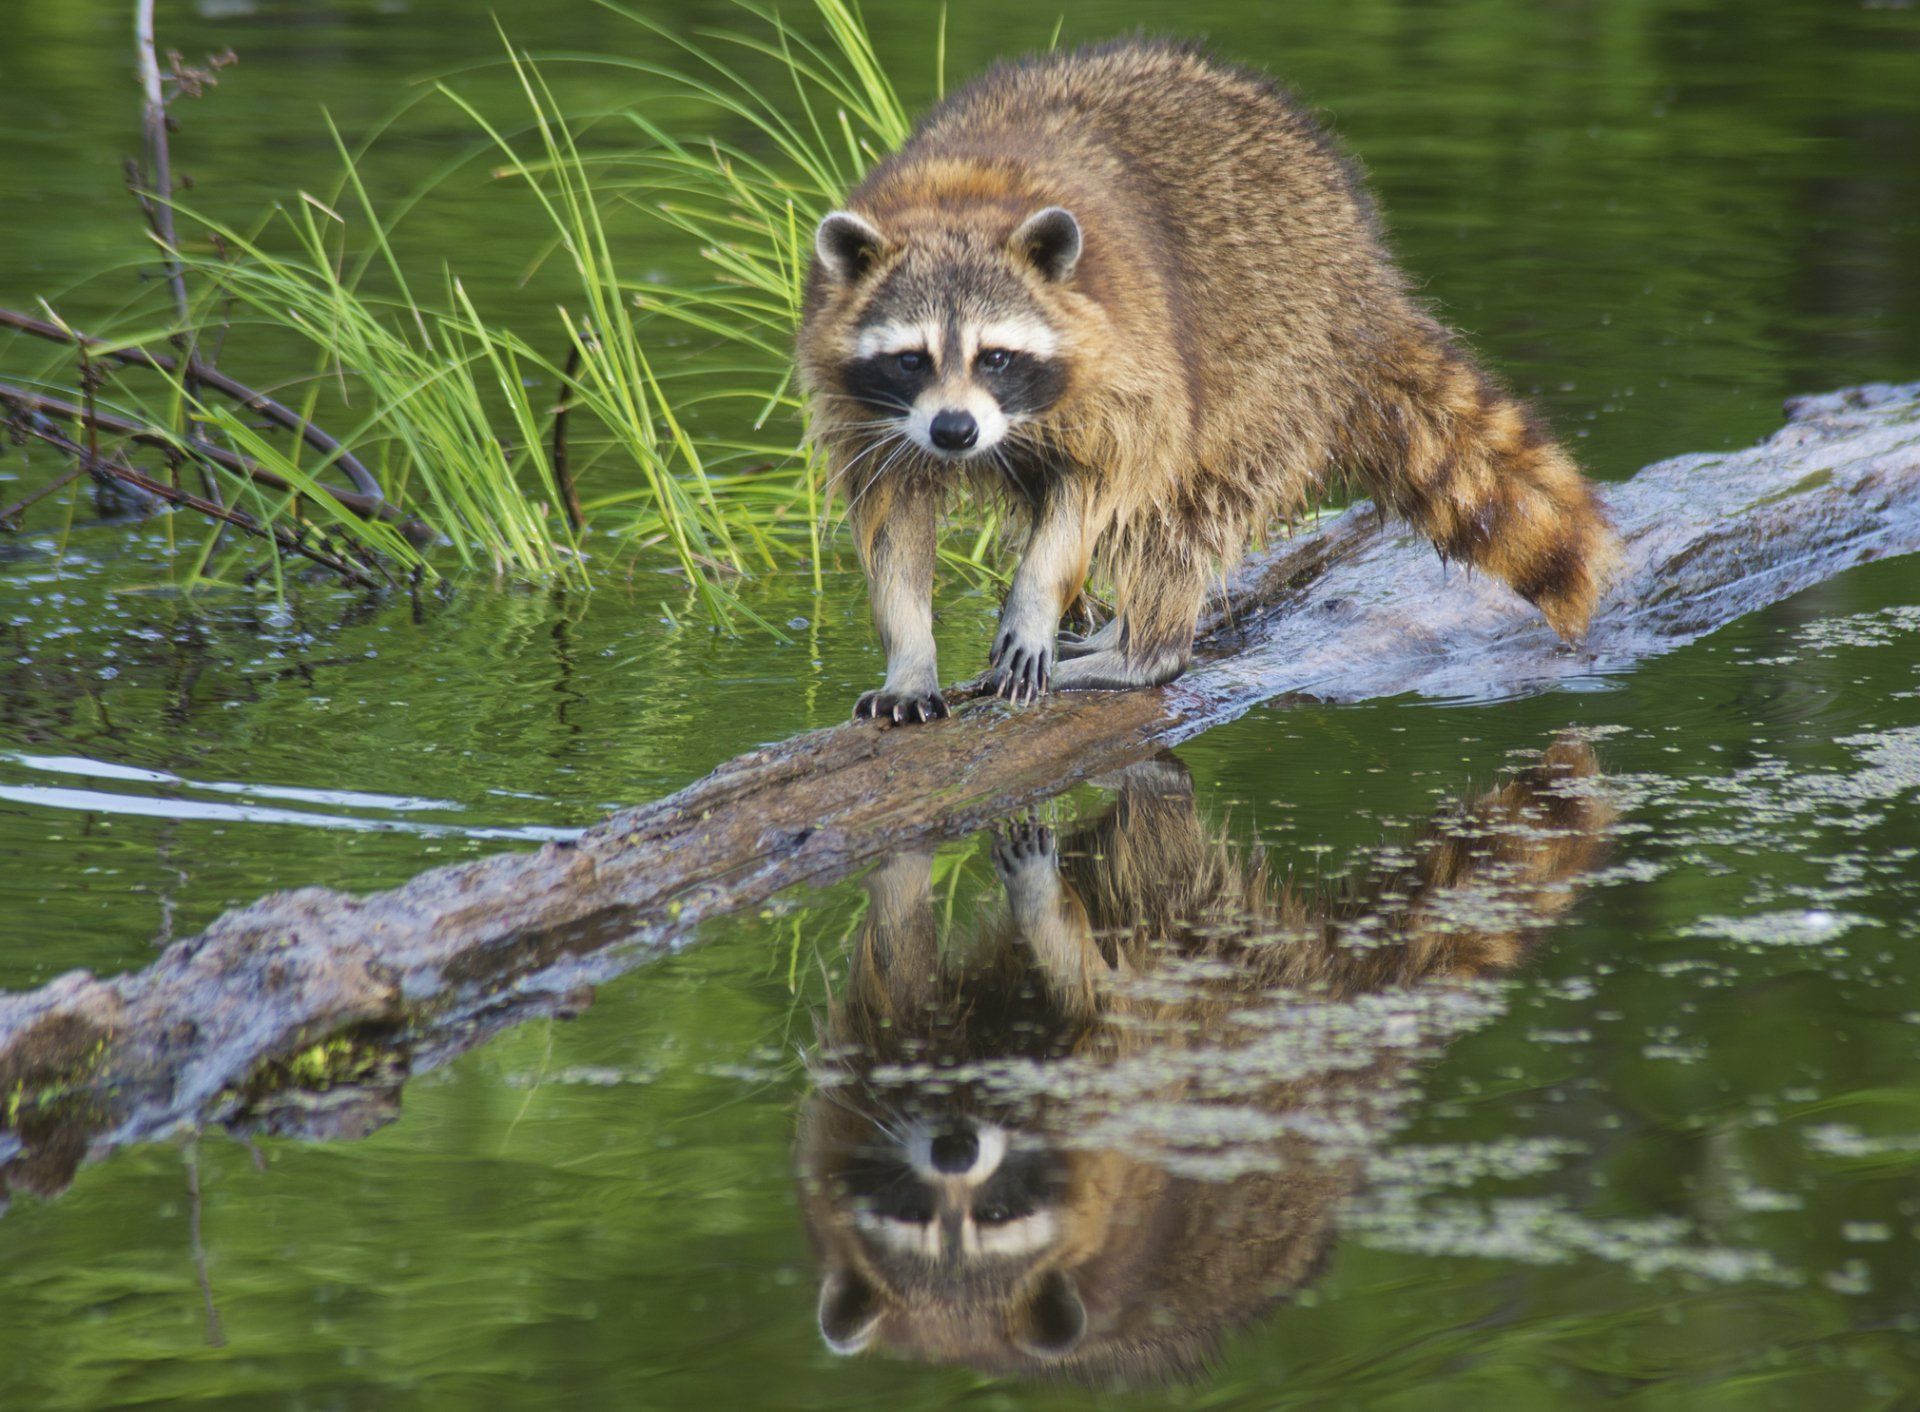 Raccoons — Raccoon Crossing The River in Crystal Lake, IL